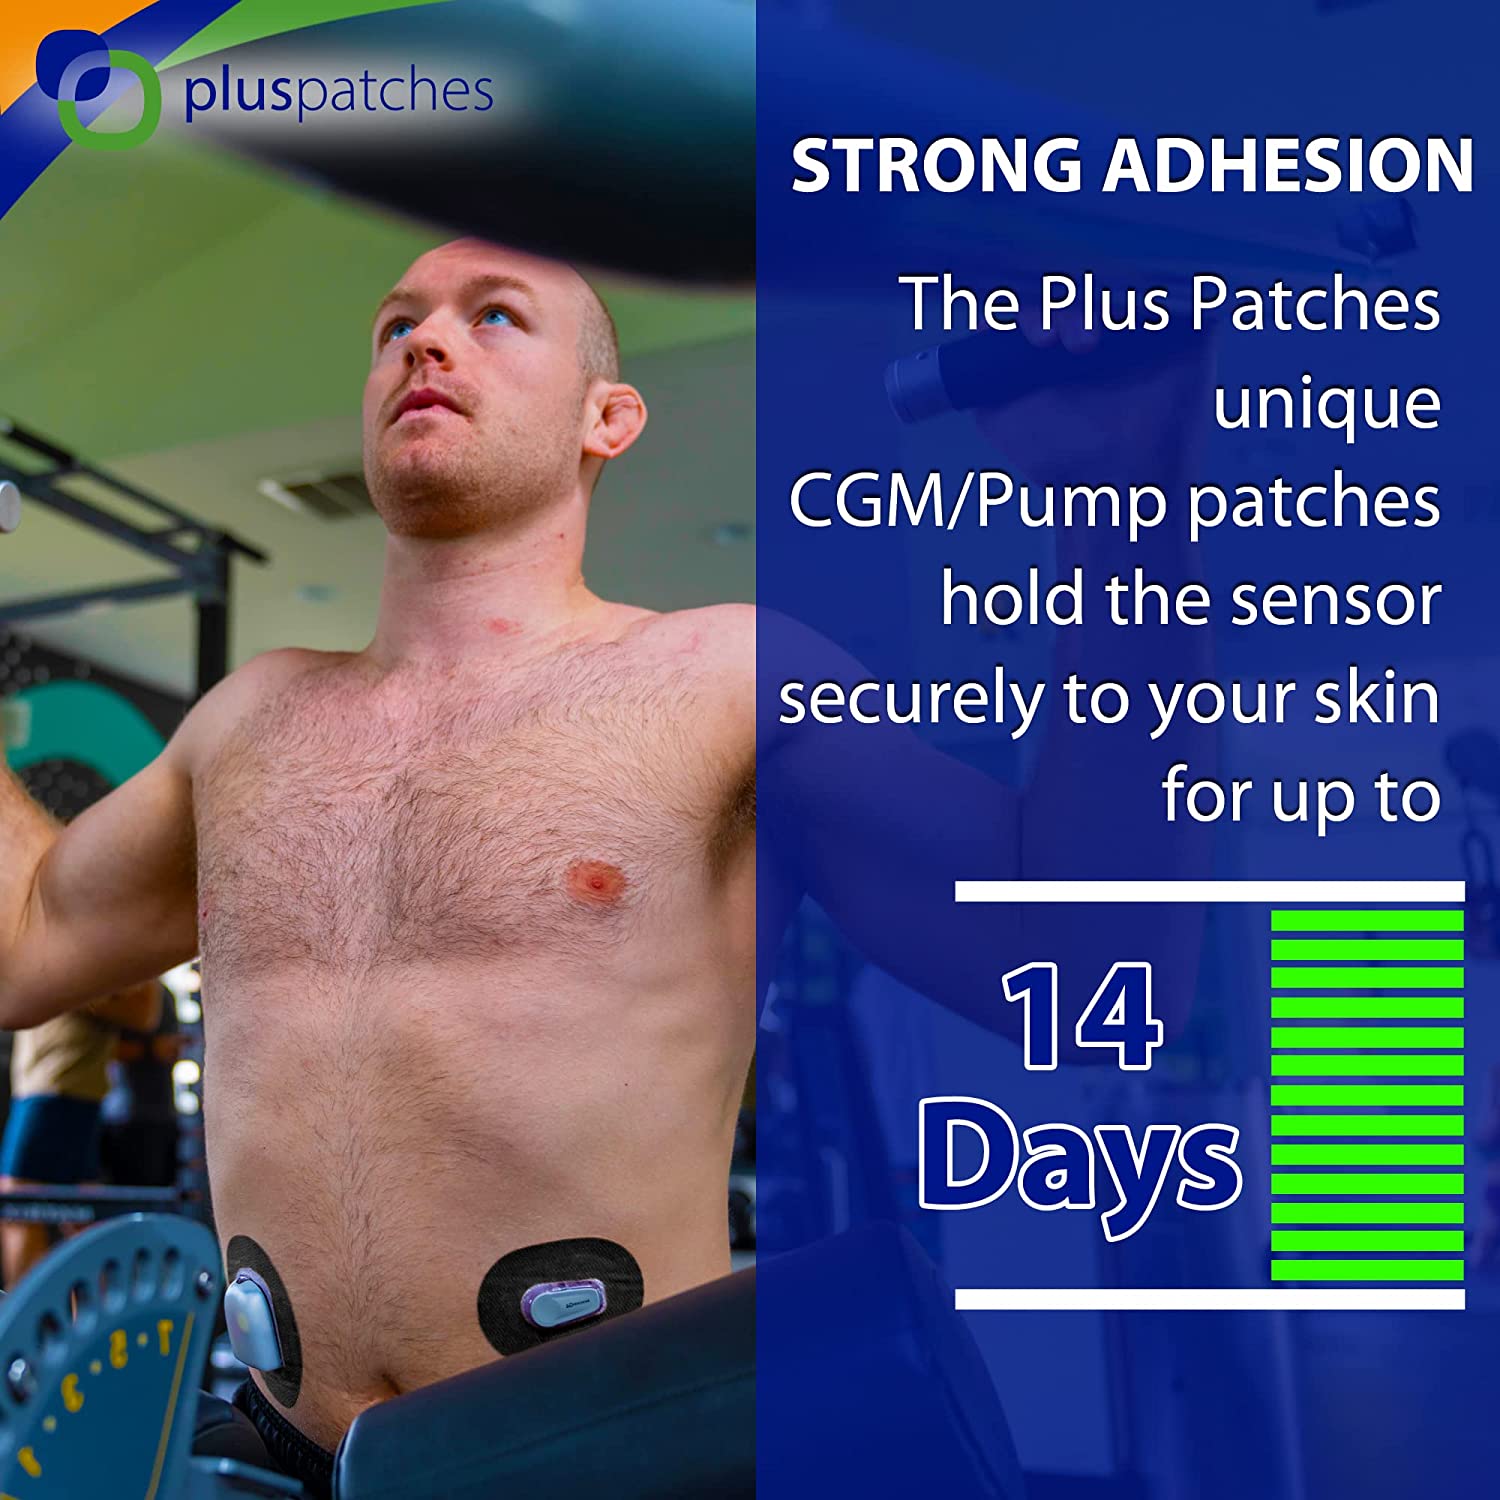 Plus Patches Insulin Pump Overlay / Cover Tape have 10-14 days holding power on your skin. The materials on the Plus Patches are designed for maximum wear time, with NO FRAYING or edge lift! The Polyurethane non-woven backing moves with your body (all around stretch) for ultimate comfort over the life of your overlay/ cover tape patch.